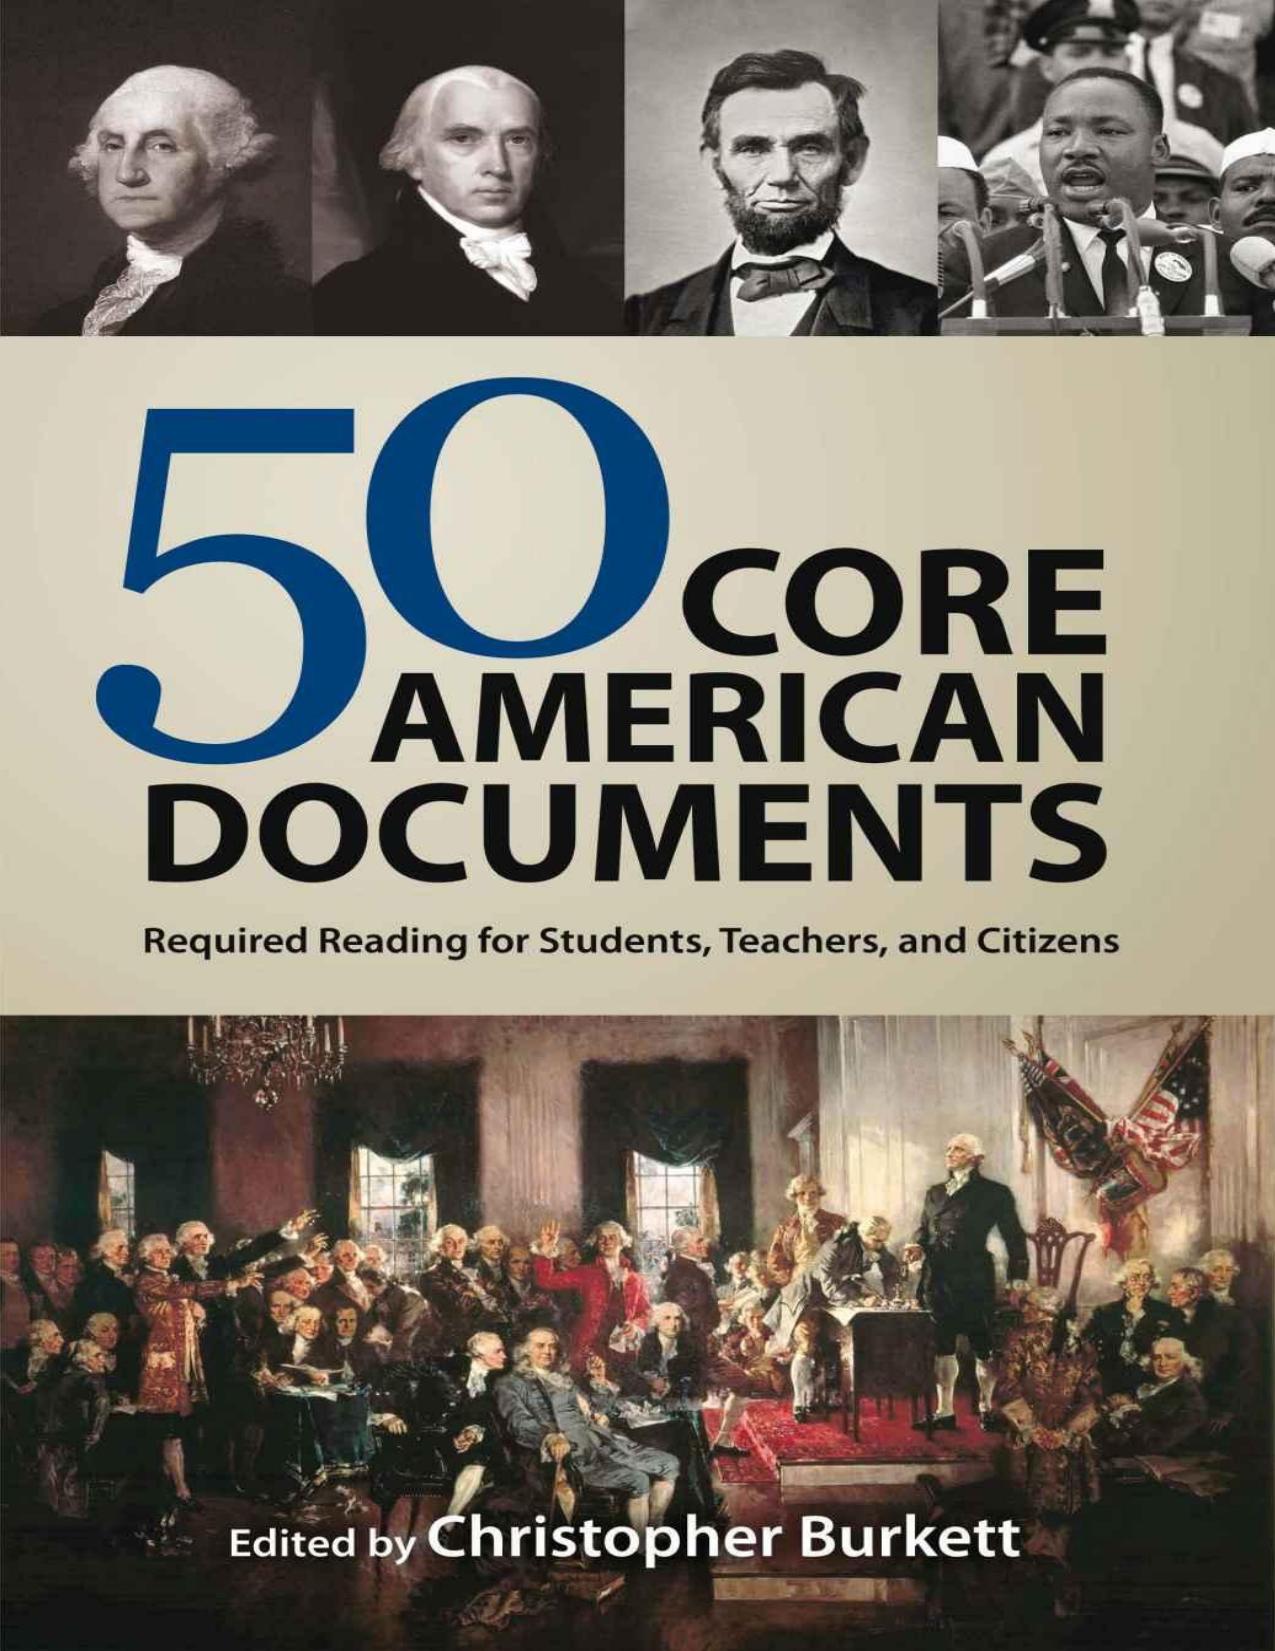 50 Core American Documents Required Reading for Students, Teachers, and Citizens - Christopher Burkett.jpg